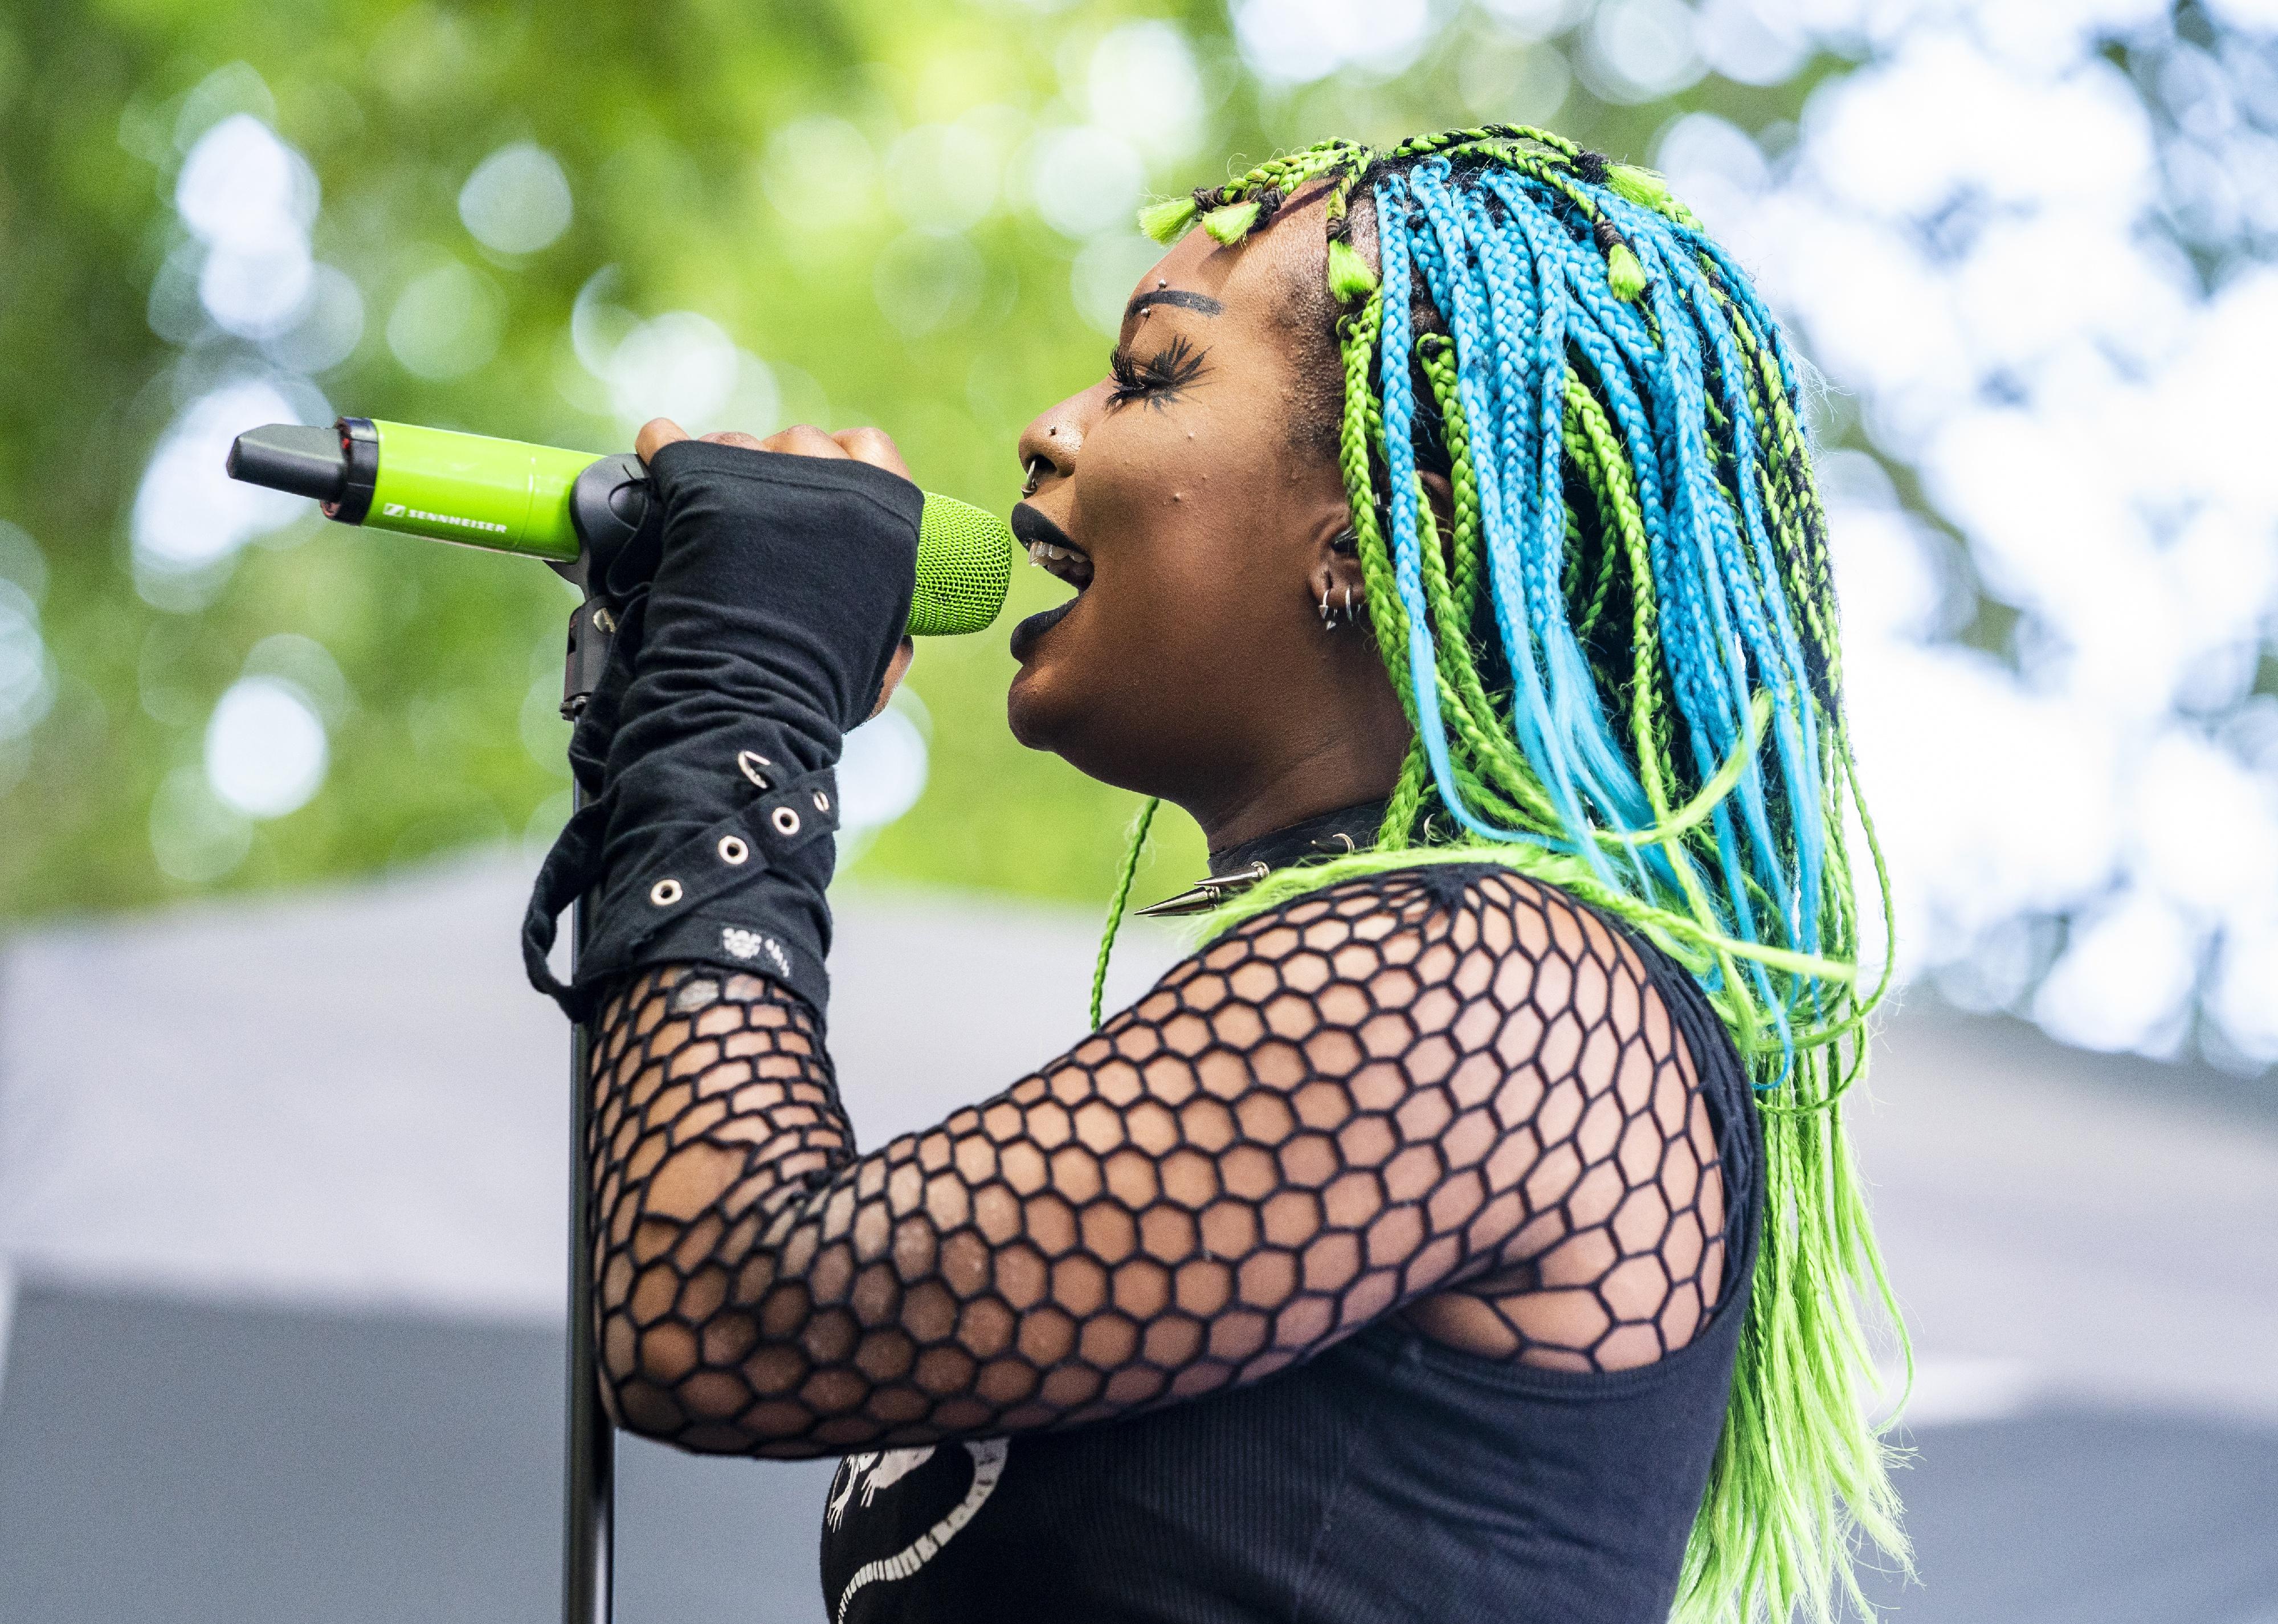 Edith Victoria of Meet Me @ The Altar performing in a fishnet top and blue and green braids.